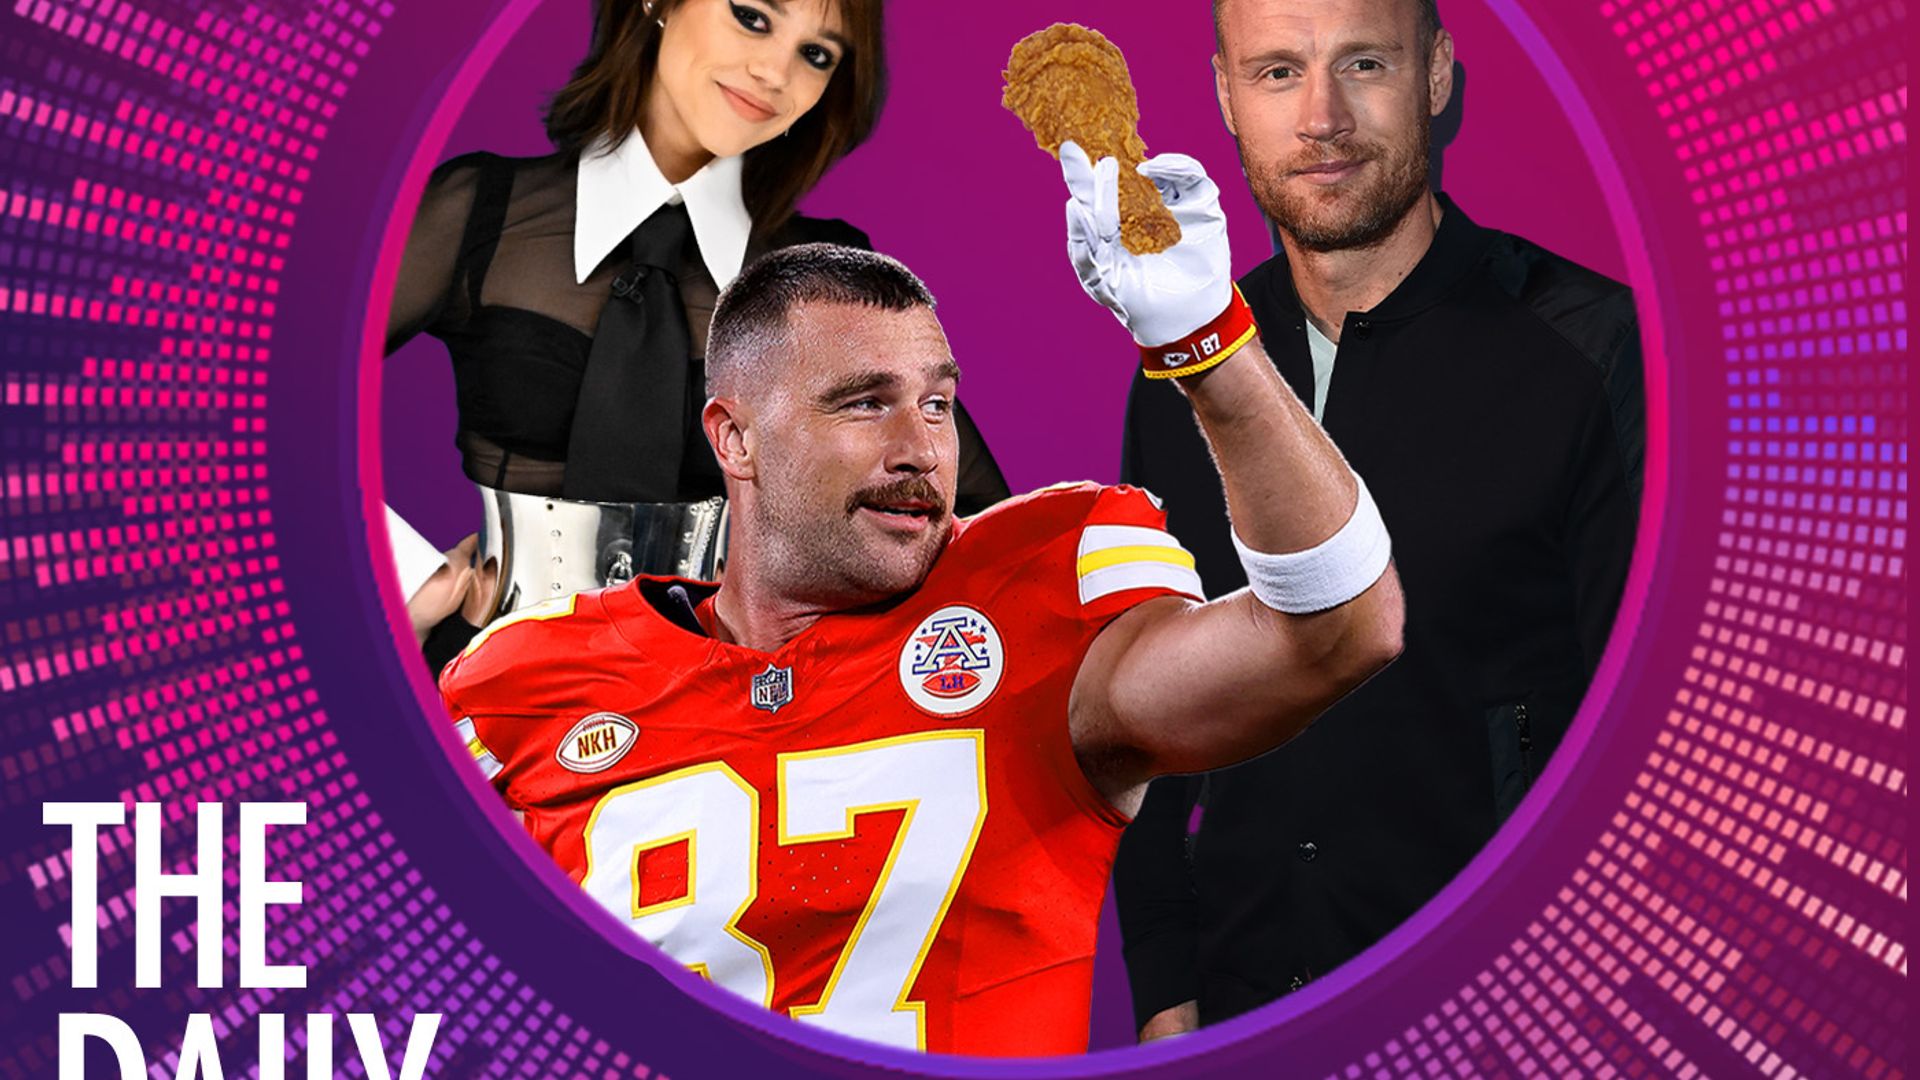 The Daily Lowdown: Why isn't Taylor Swift spending Thanksgiving with Travis Kelce?